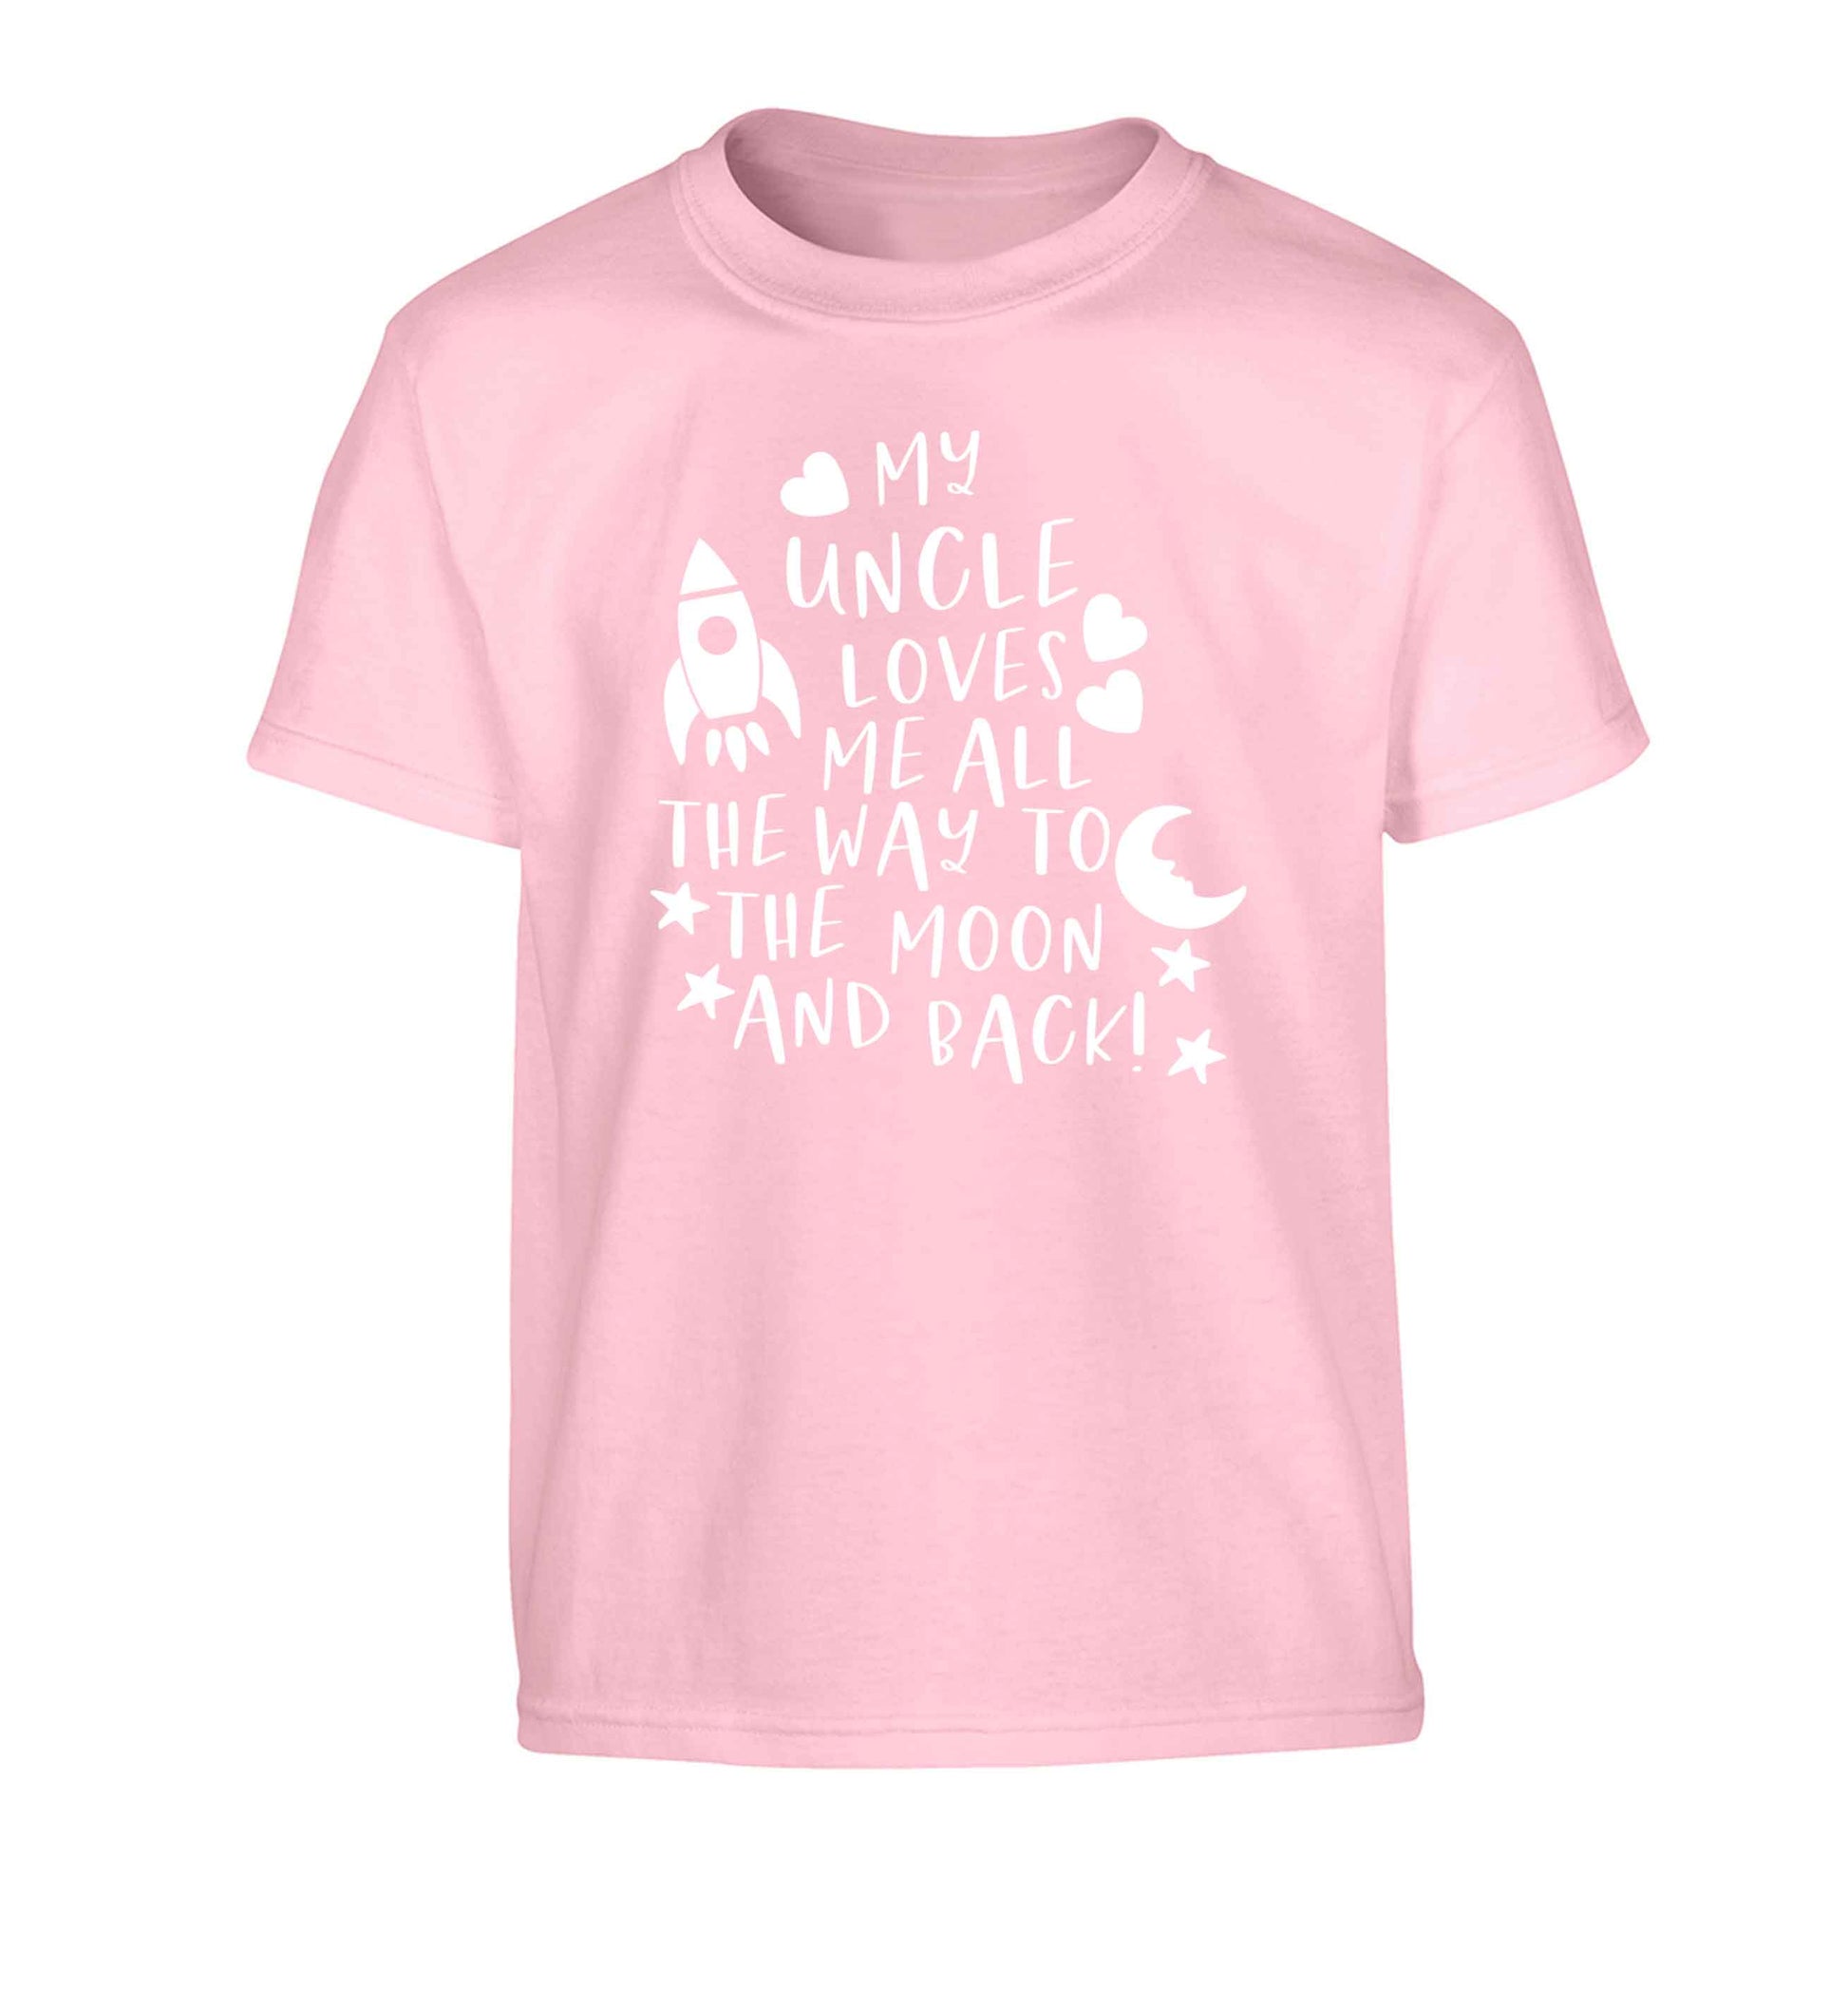 My uncle loves me all the way to the moon and back Children's light pink Tshirt 12-13 Years